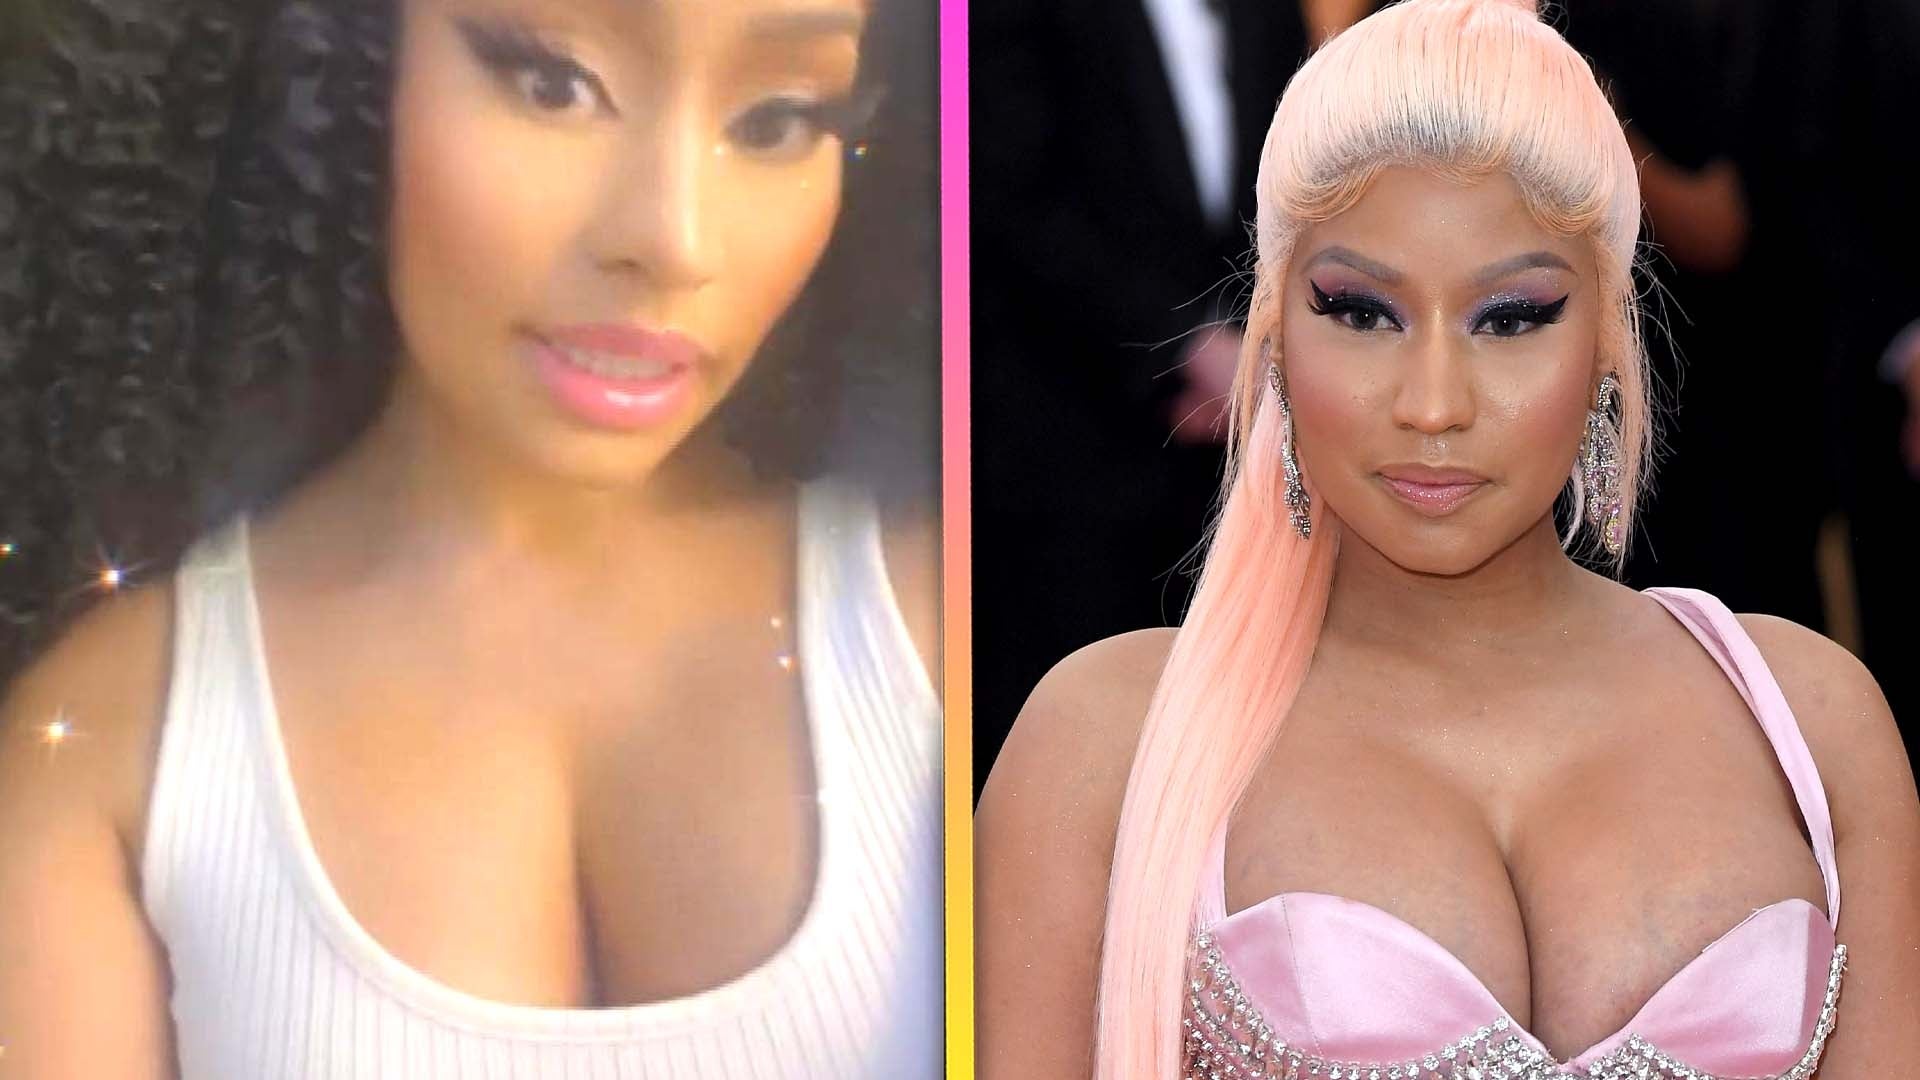 carlos e zambrano recommends Nicki Minaj Playing With Her Boobs